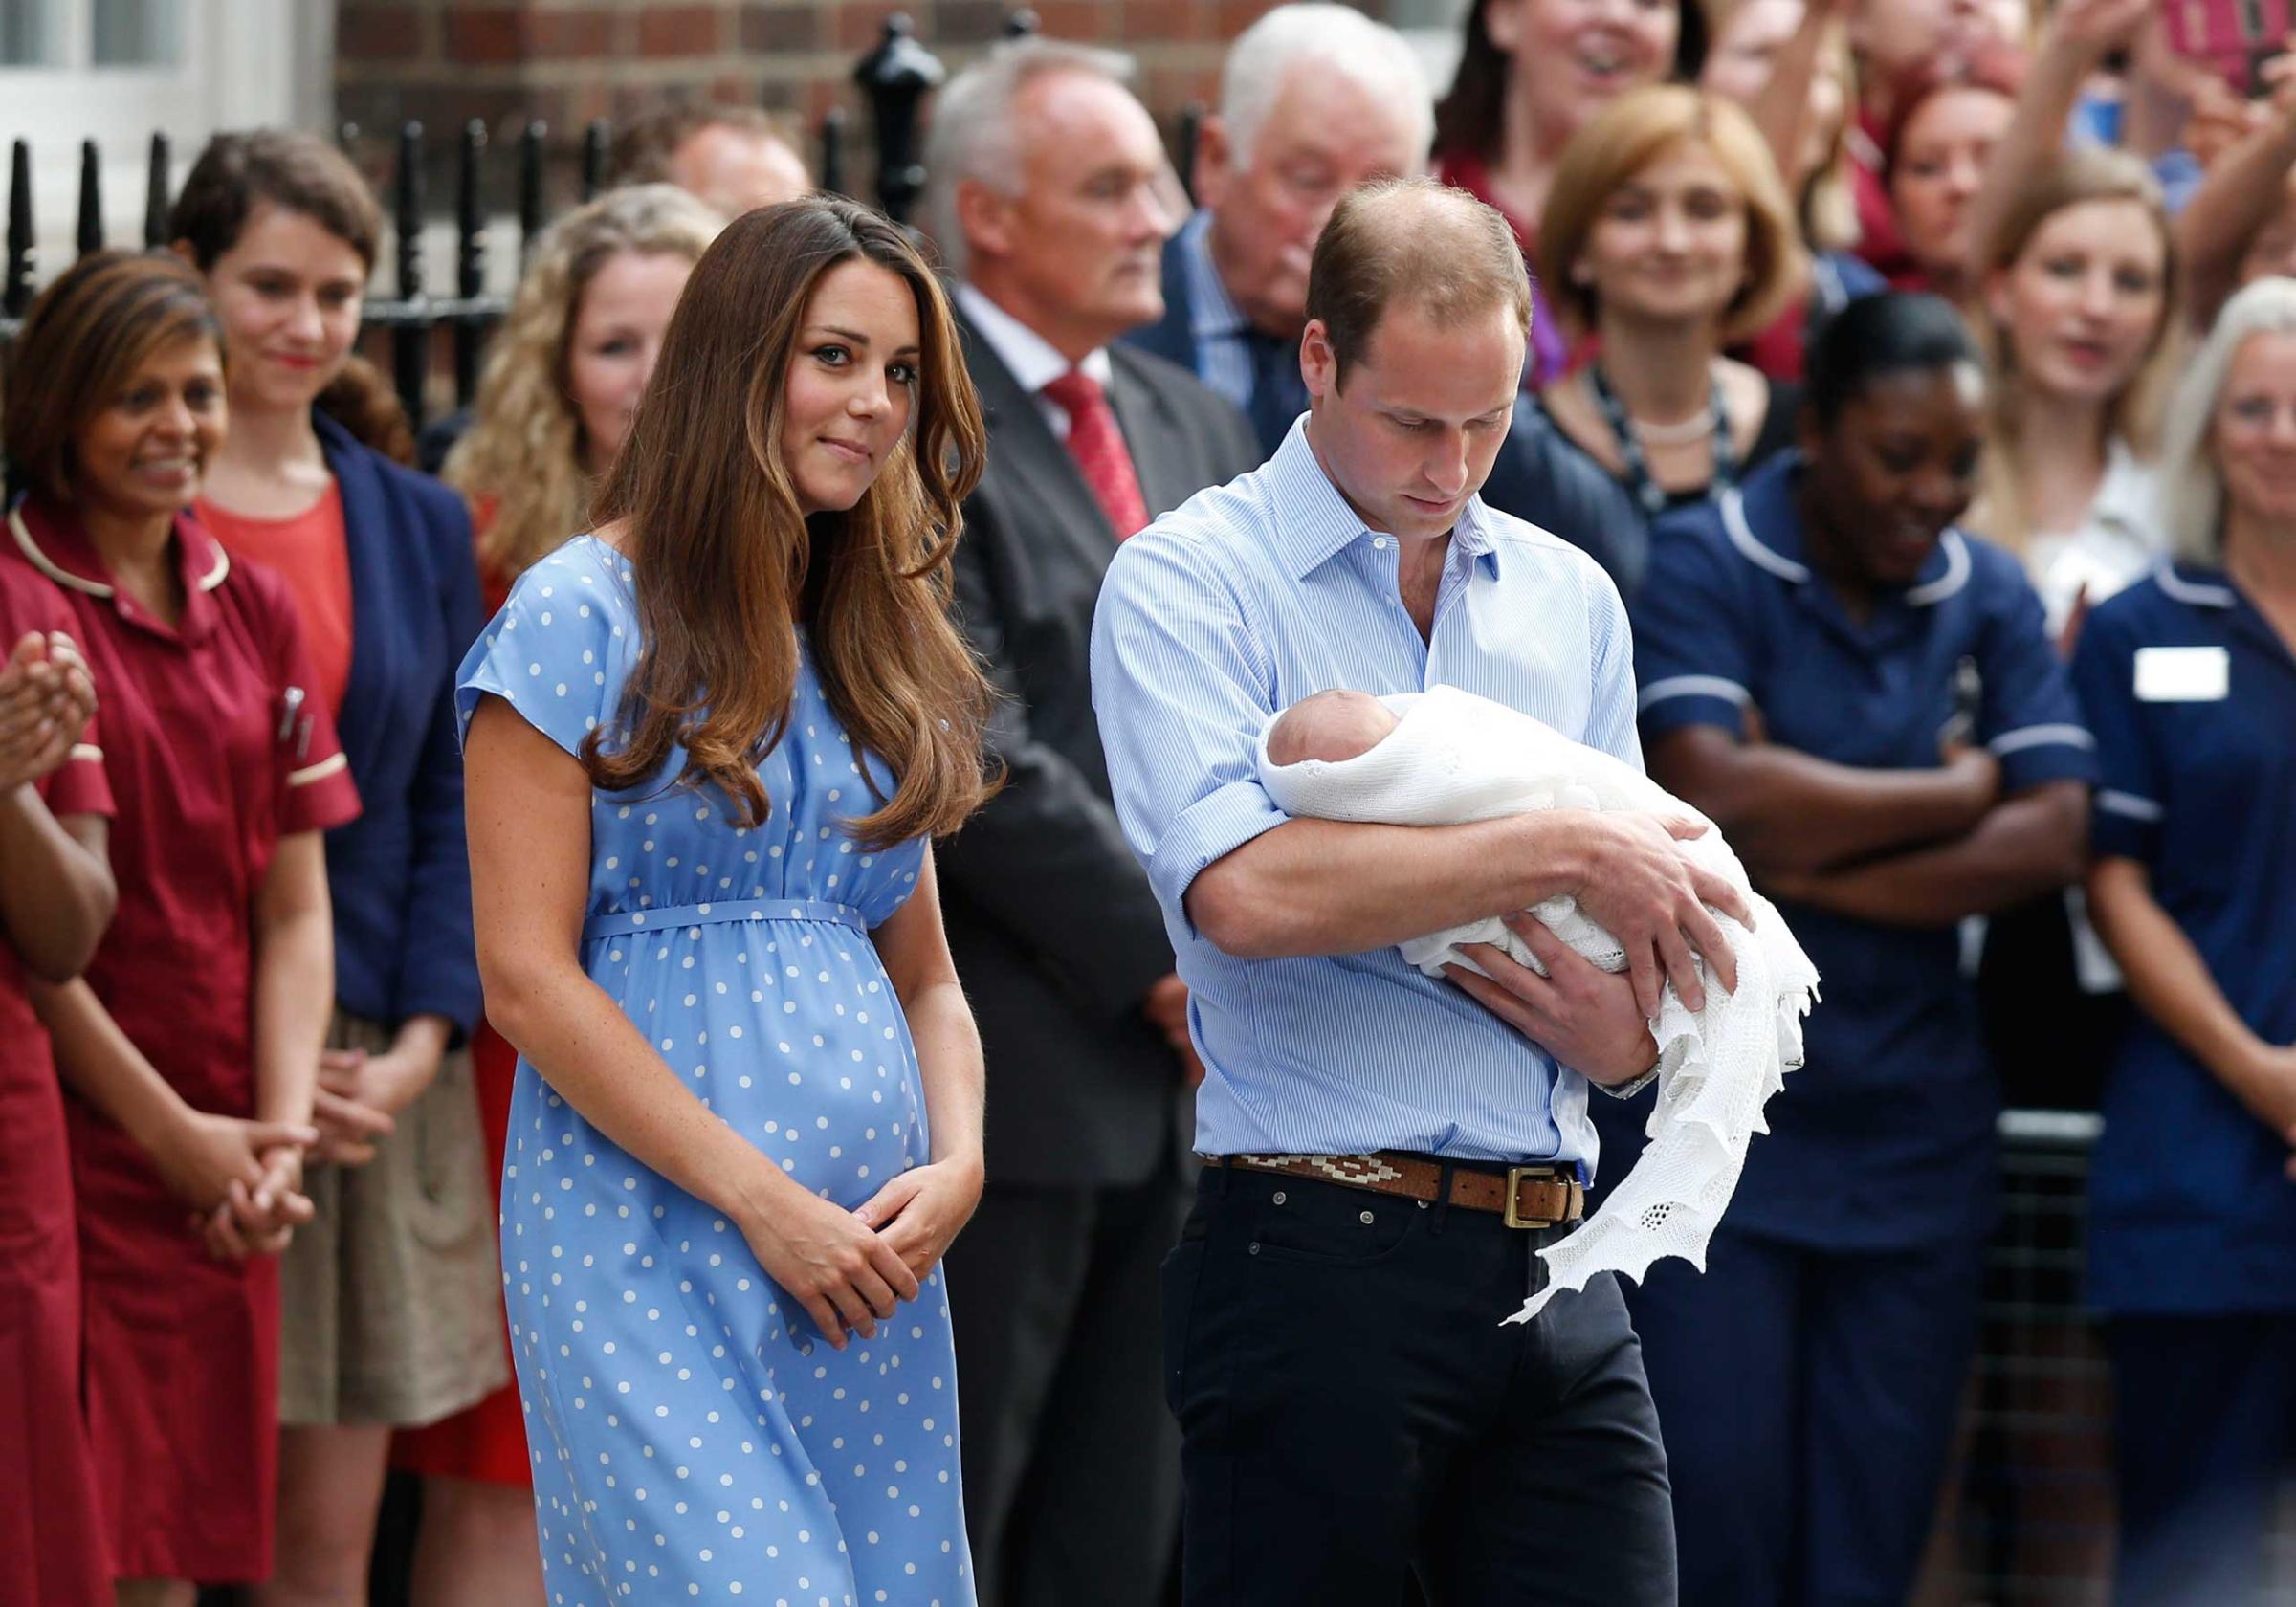 Britain's Prince William, right, and Kate, Duchess of Cambridge hold the Prince of Cambridge, Tuesday July 23, 2013, as they pose for photographers outside St. Mary's Hospital exclusive Lindo Wing in London where the Duchess gave birth on Monday July 22. The boy, who is third in line to the British throne, has since been named George Alexander Louis by his parents and will be known as Prince George of Cambridge. (AP Photo/Sang Tan)